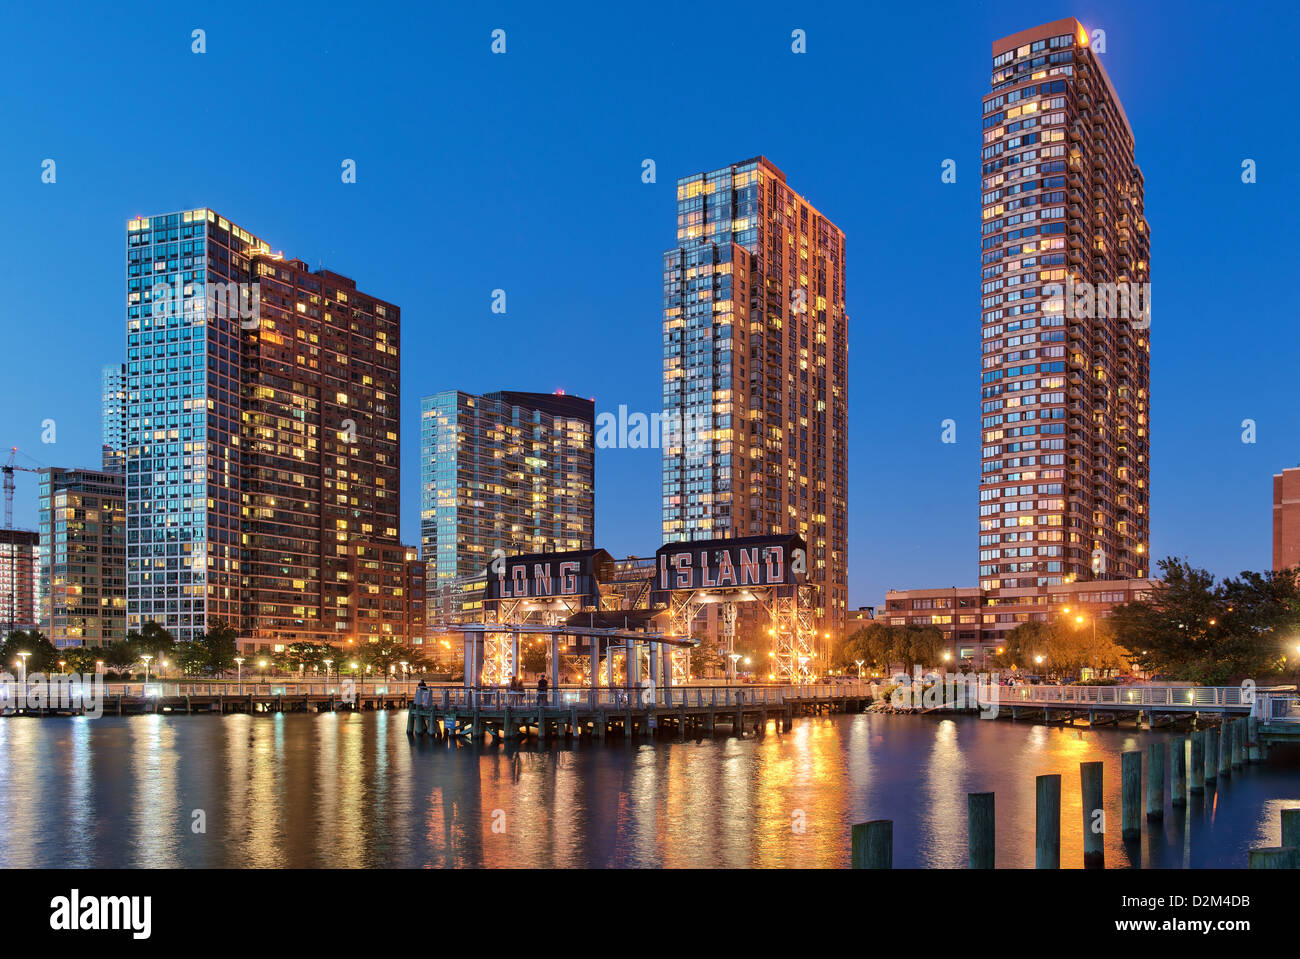 Long Island Luxury condos and gantries from Gantry Plaza State Park in Long Island, NYC Stock Photo